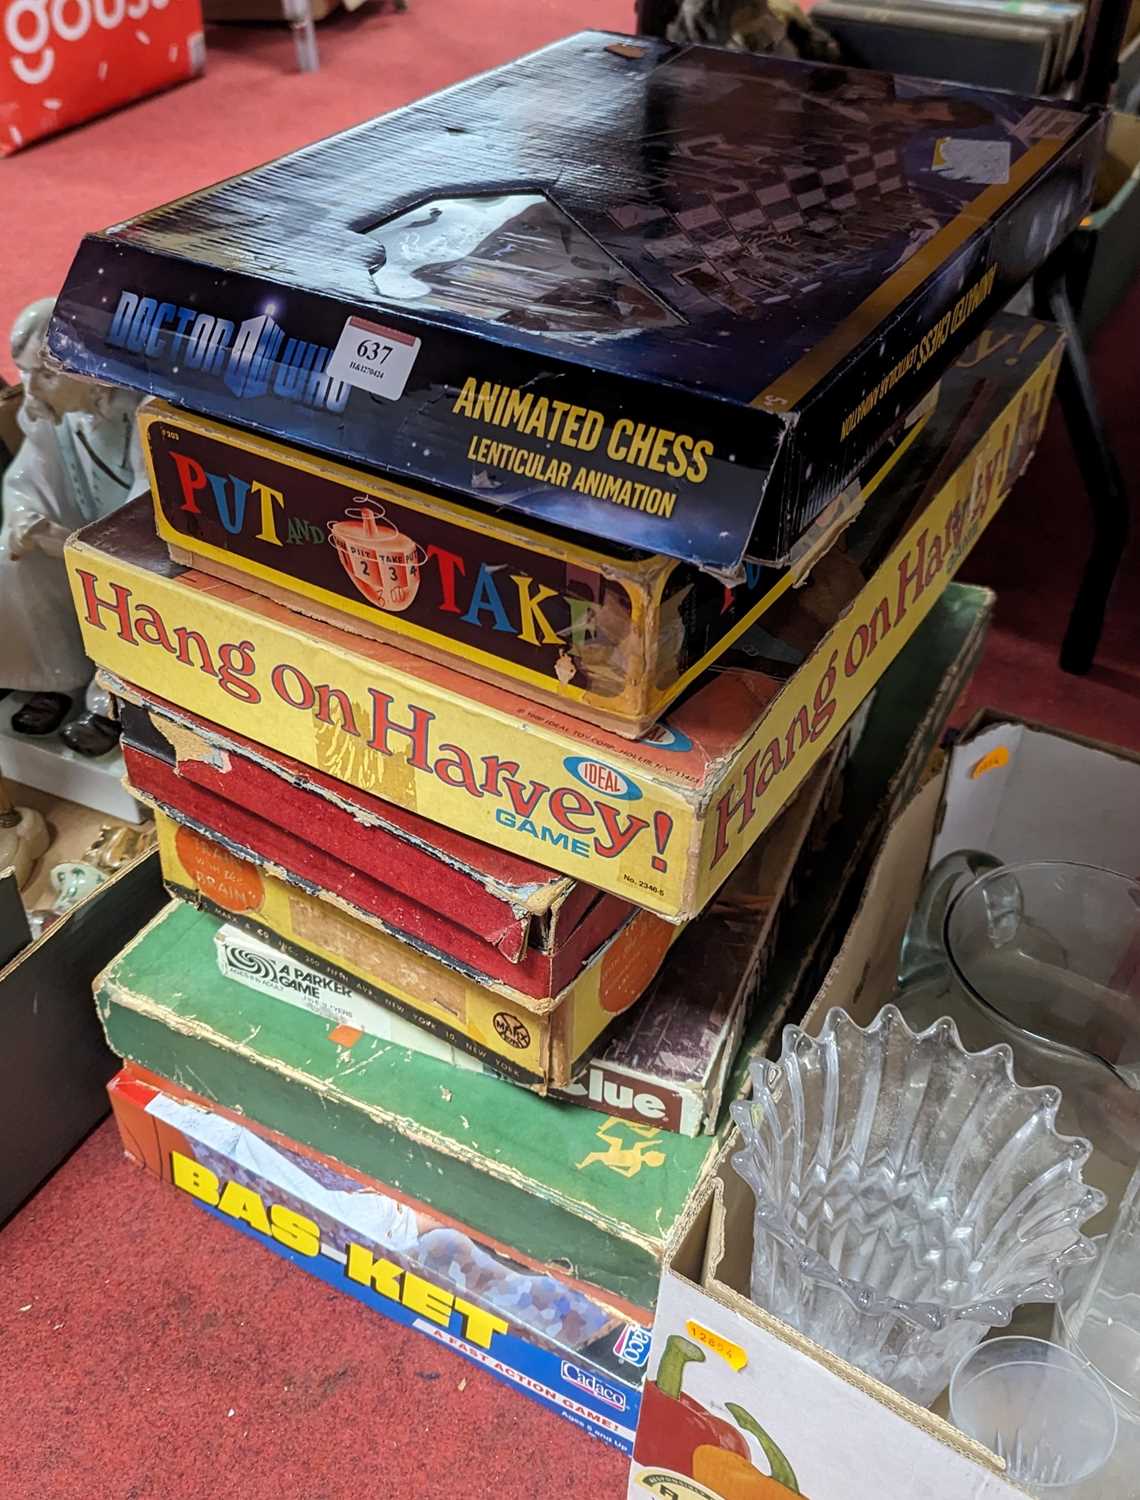 A collection of vintage board games, to include a Doctor Who animated chess set